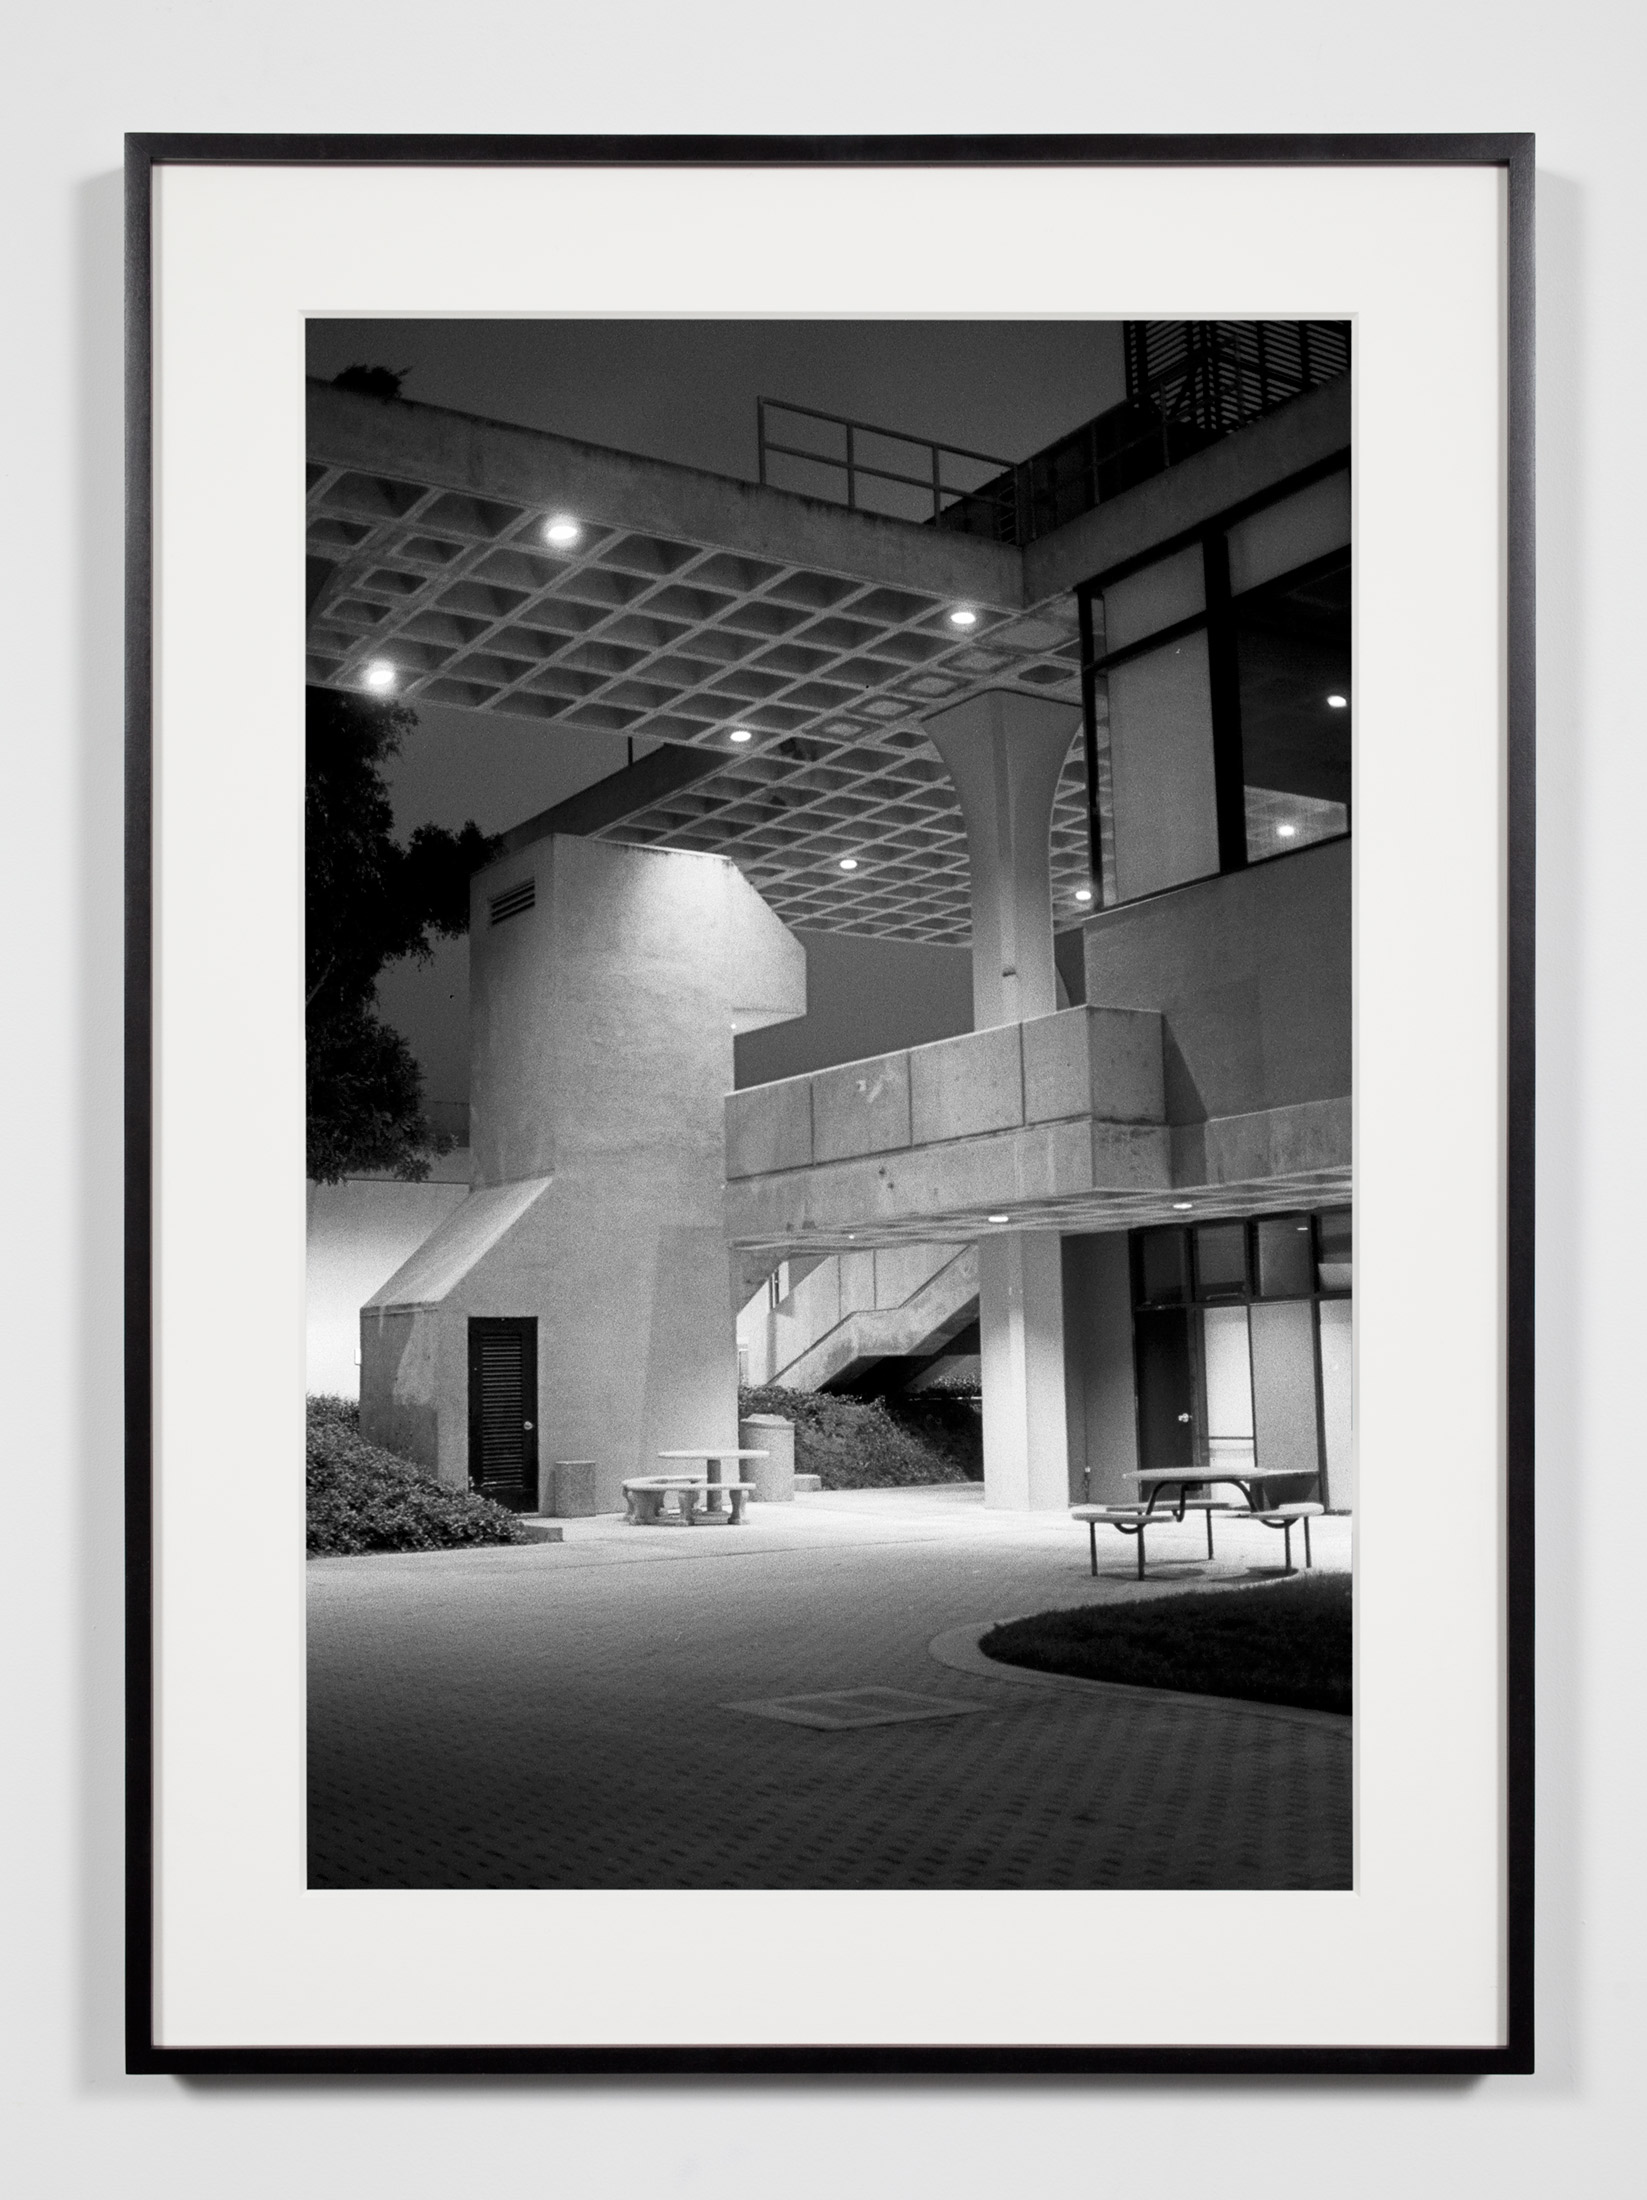   Claire Trevor School of the Arts (University of California Irvine), Irvine, California, July 17, 2008    2008   Epson Ultrachrome K3 archival ink jet print on Hahnemühle Photo Rag paper  36 3/8 x 26 3/8 inches   Industrial Portraits, 2008–     